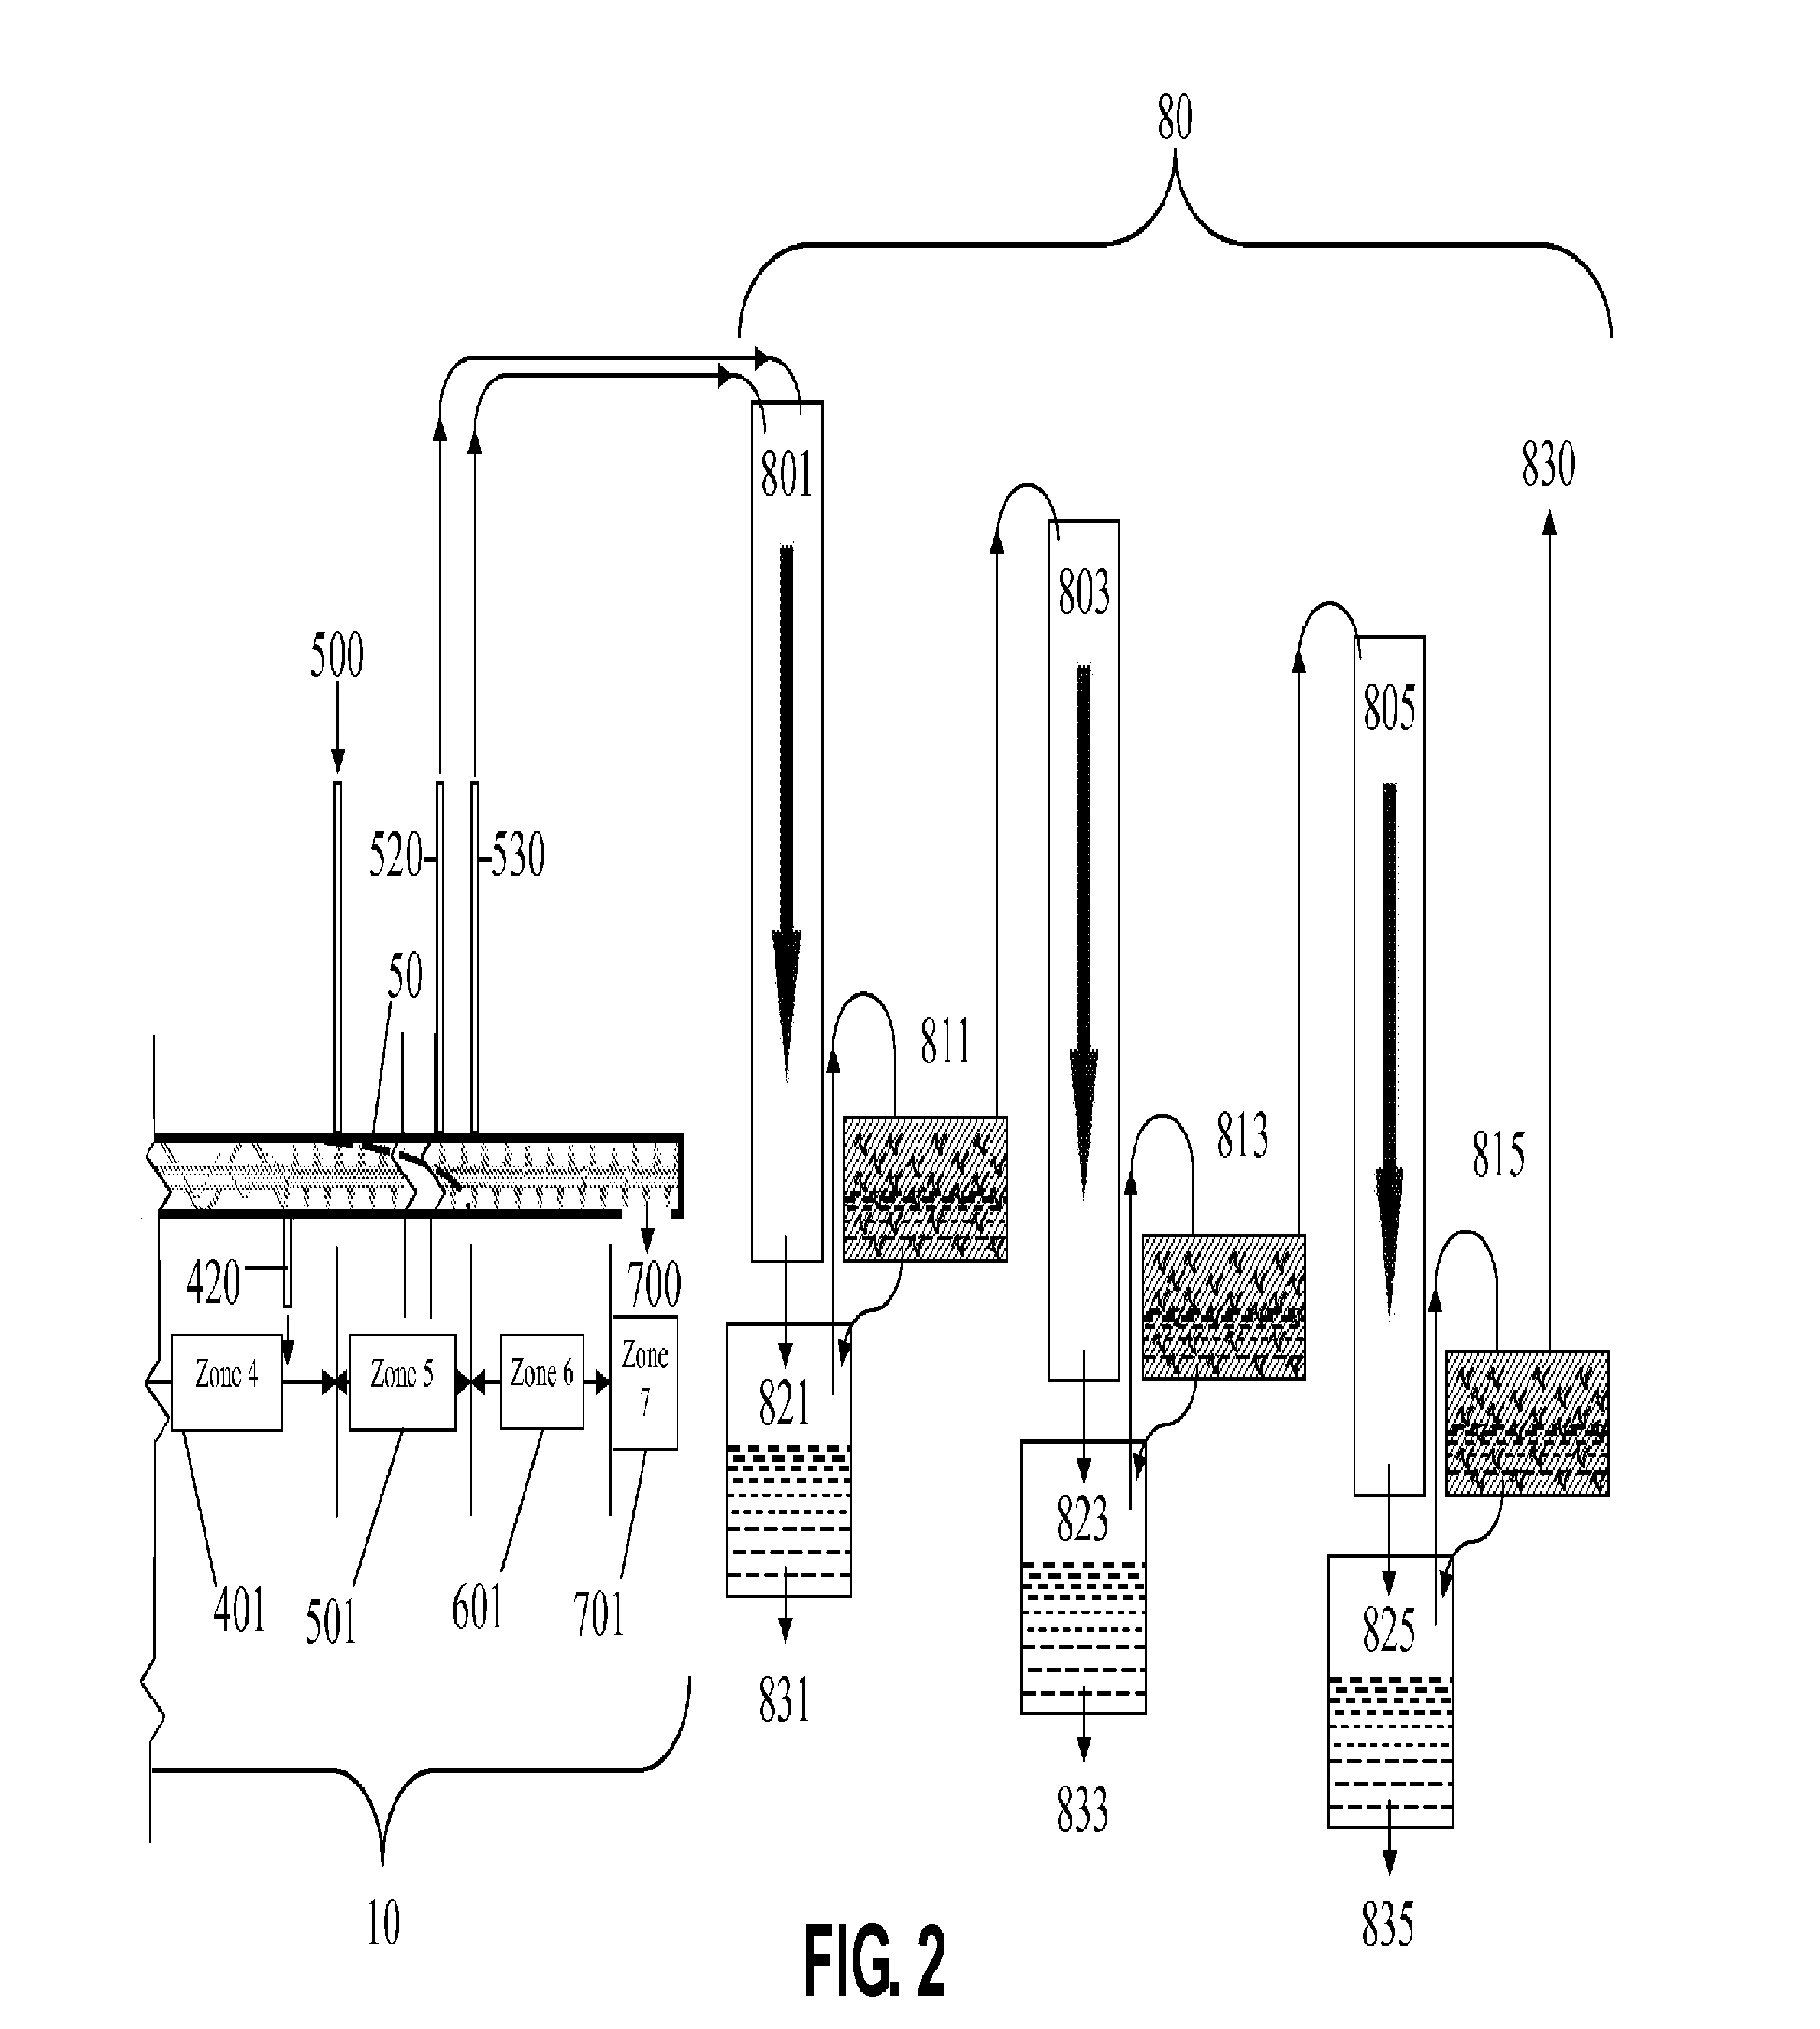 Zone-delineated pyrolysis apparatus for conversion of polymer waste